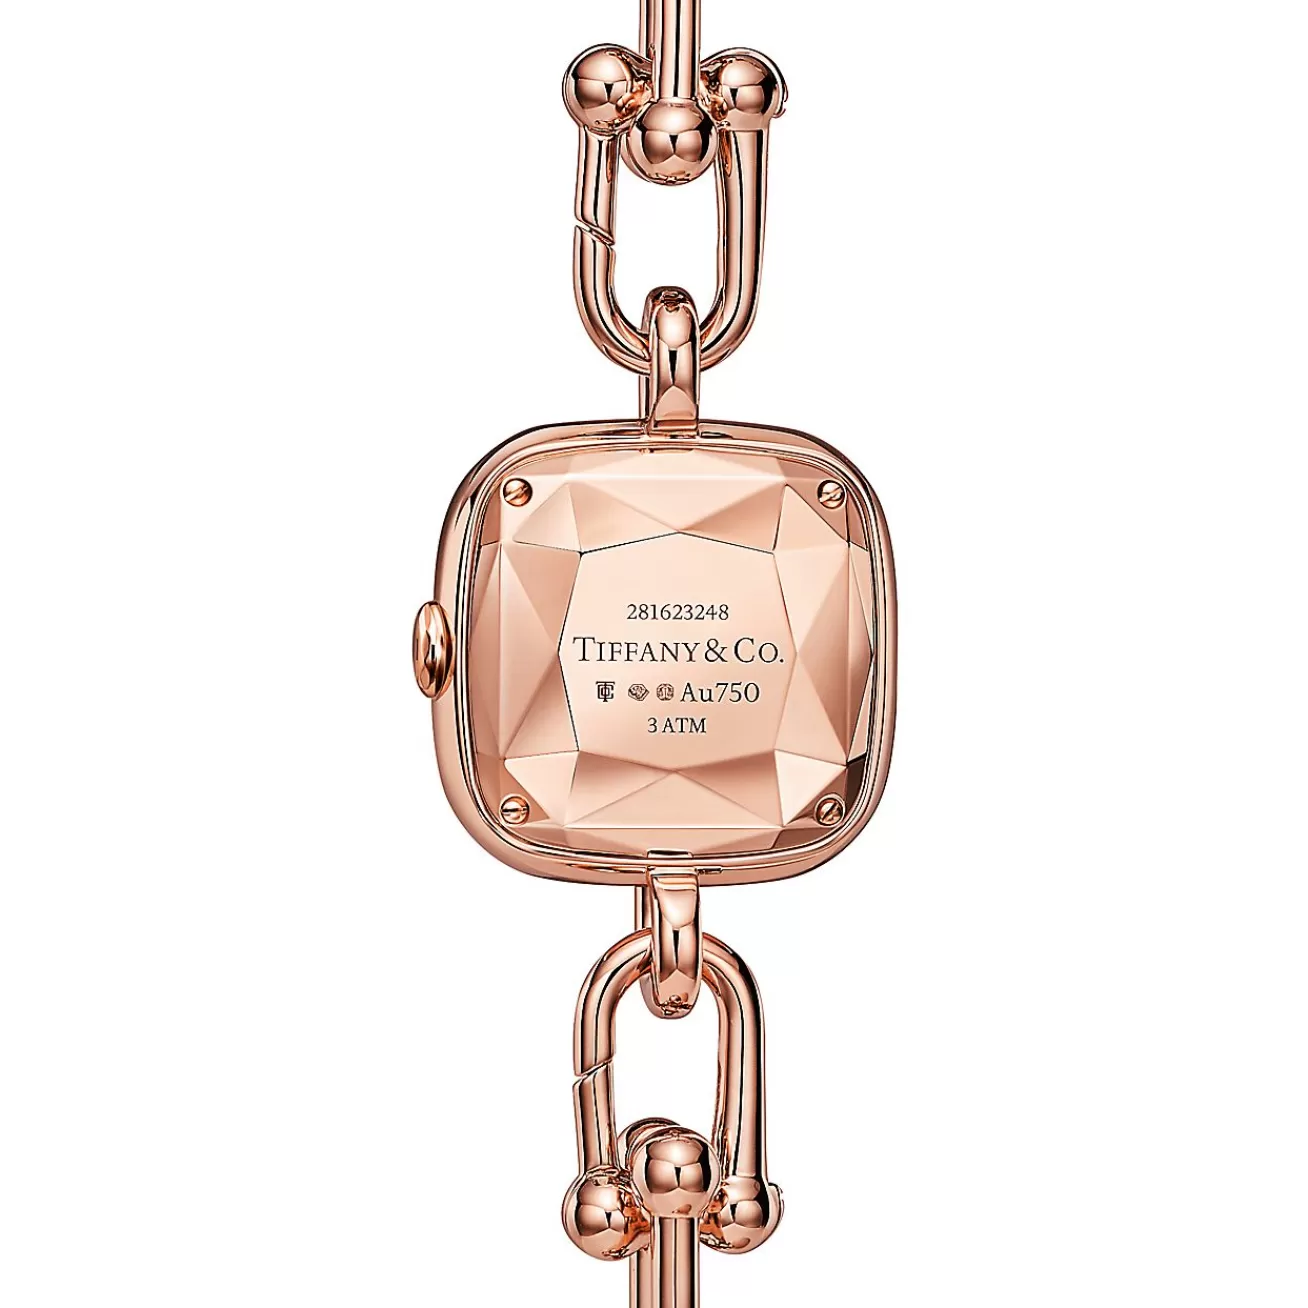 Tiffany & Co. Tiffany HardWear Watch in Rose Gold with Pavé Diamonds and White Mother-of-pearl | ^Women Fine Watches | Tiffany HardWear